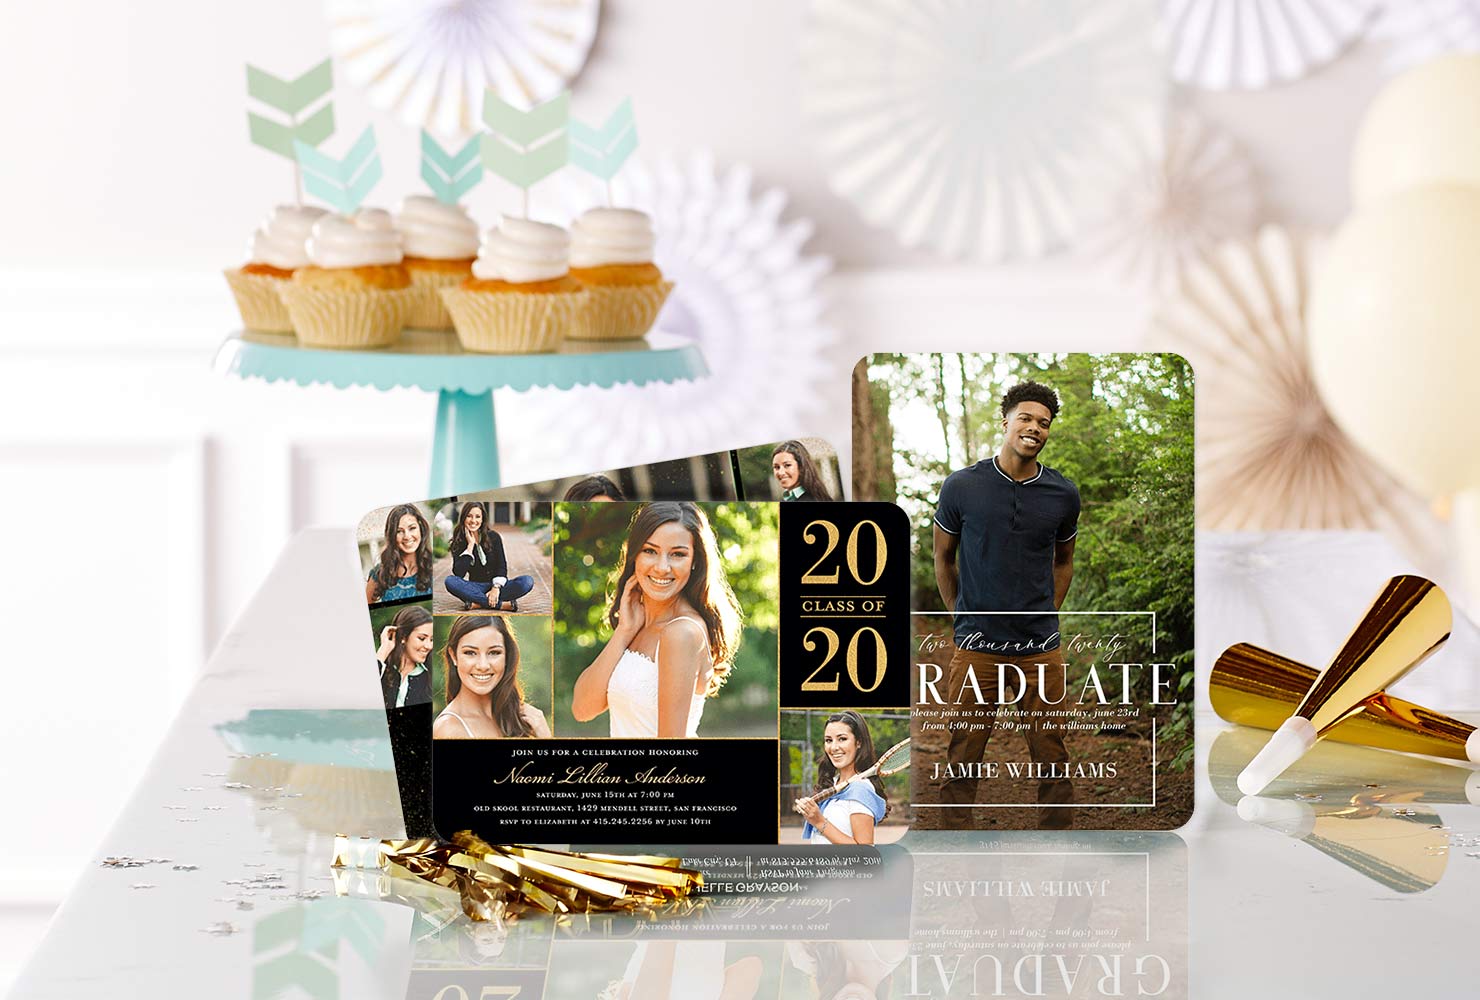 Graduation party decor with photo invites on table